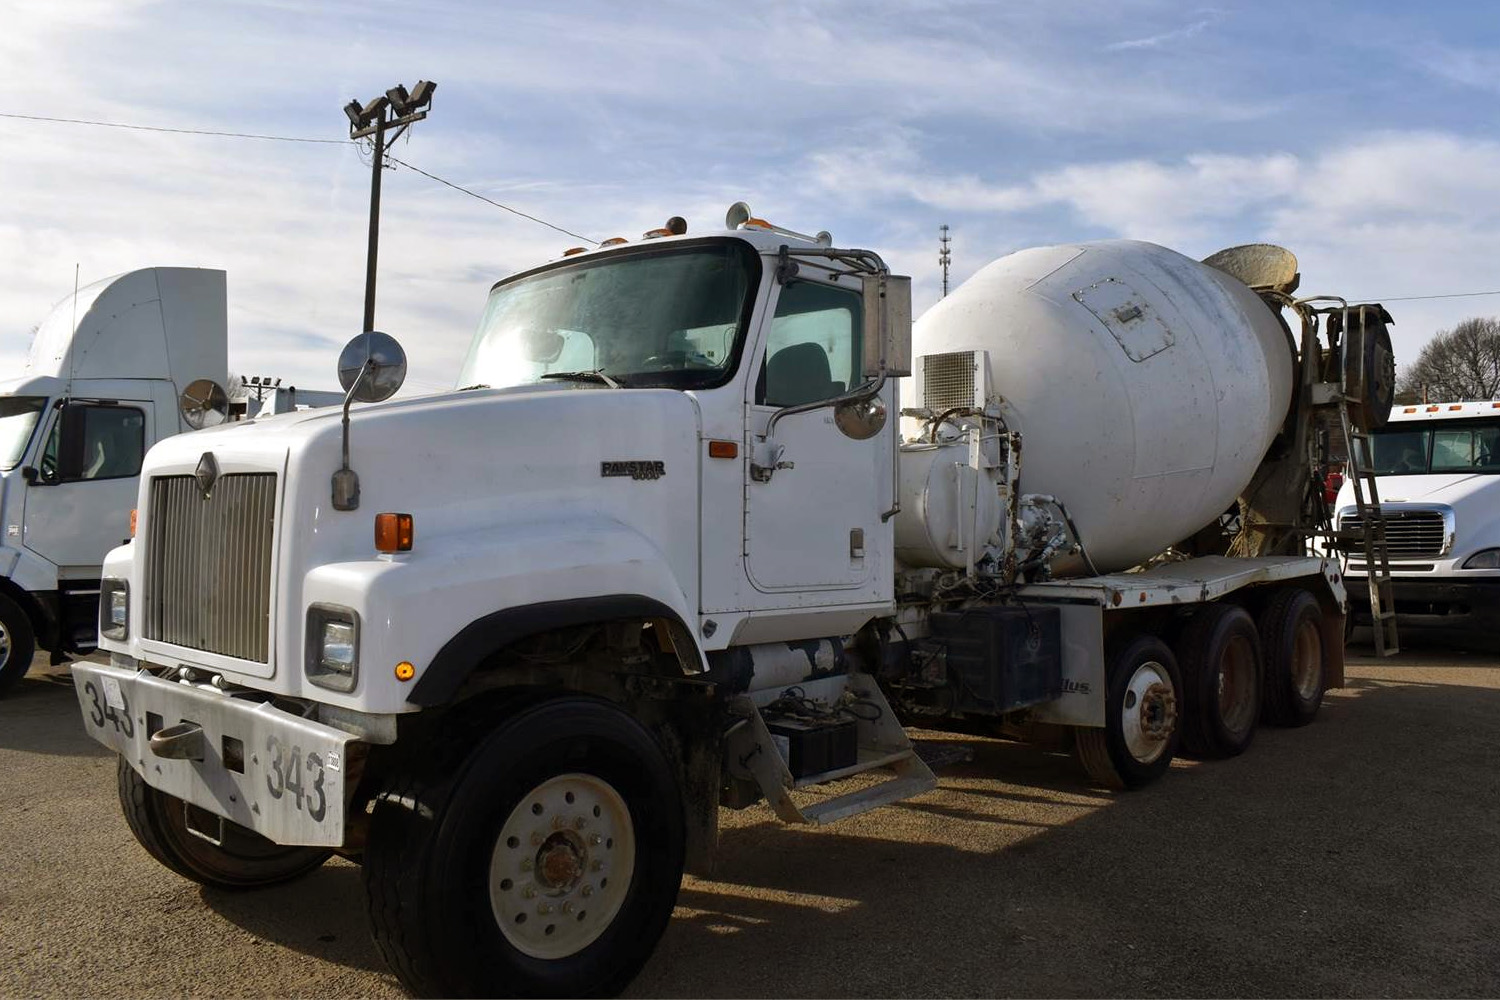 Powerstar concrete mixing truck with an 8-10 yard capacity.